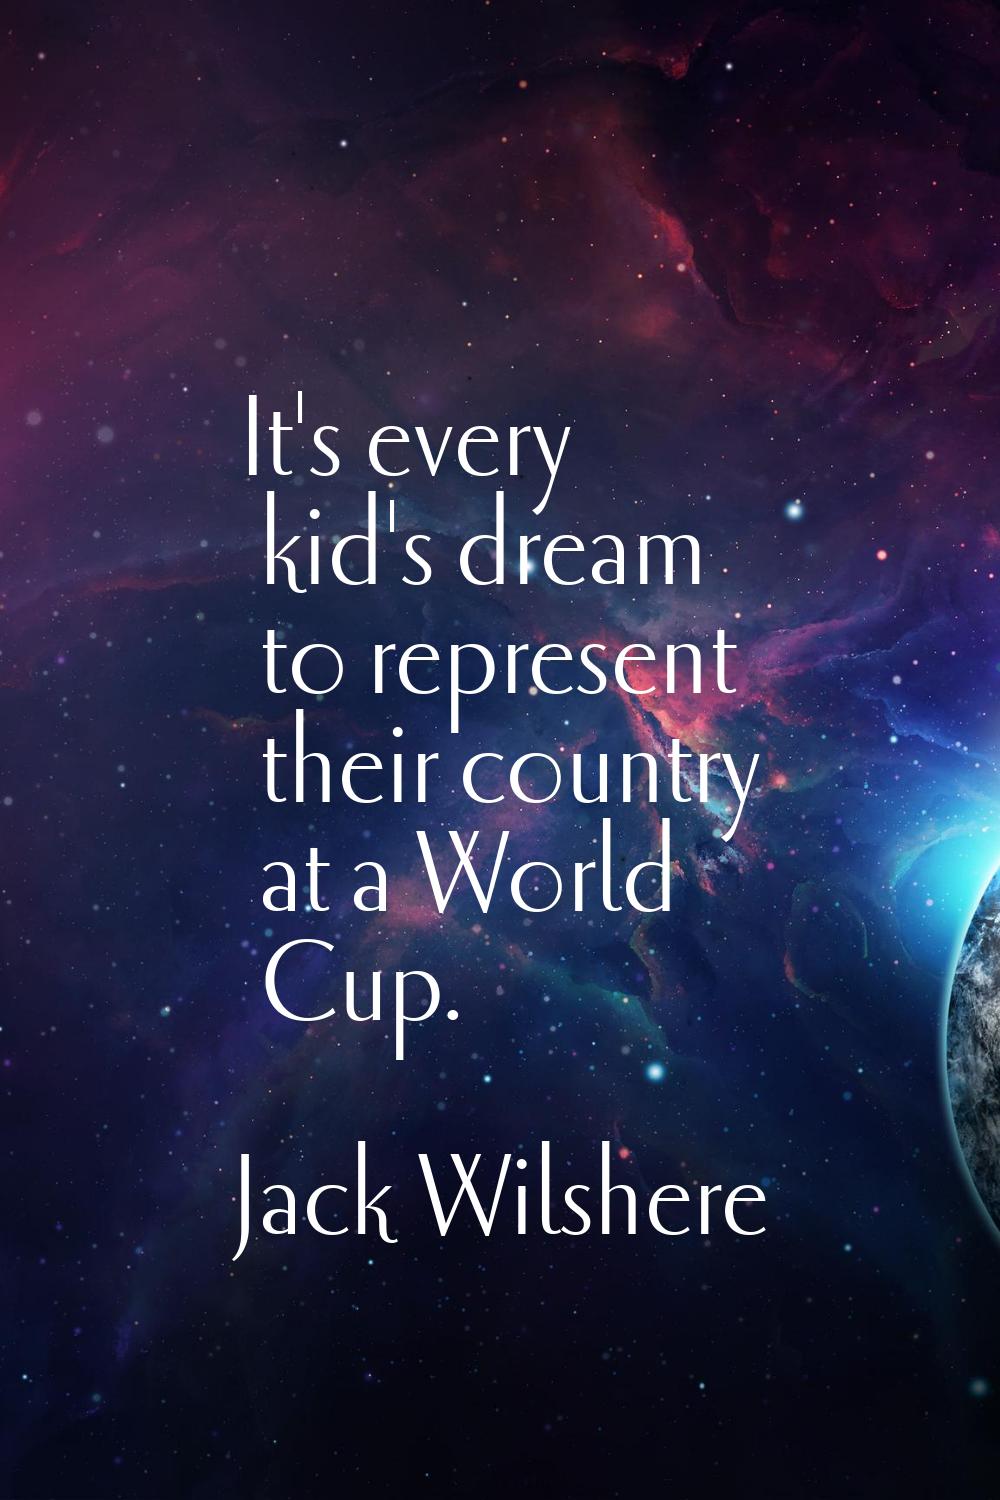 It's every kid's dream to represent their country at a World Cup.